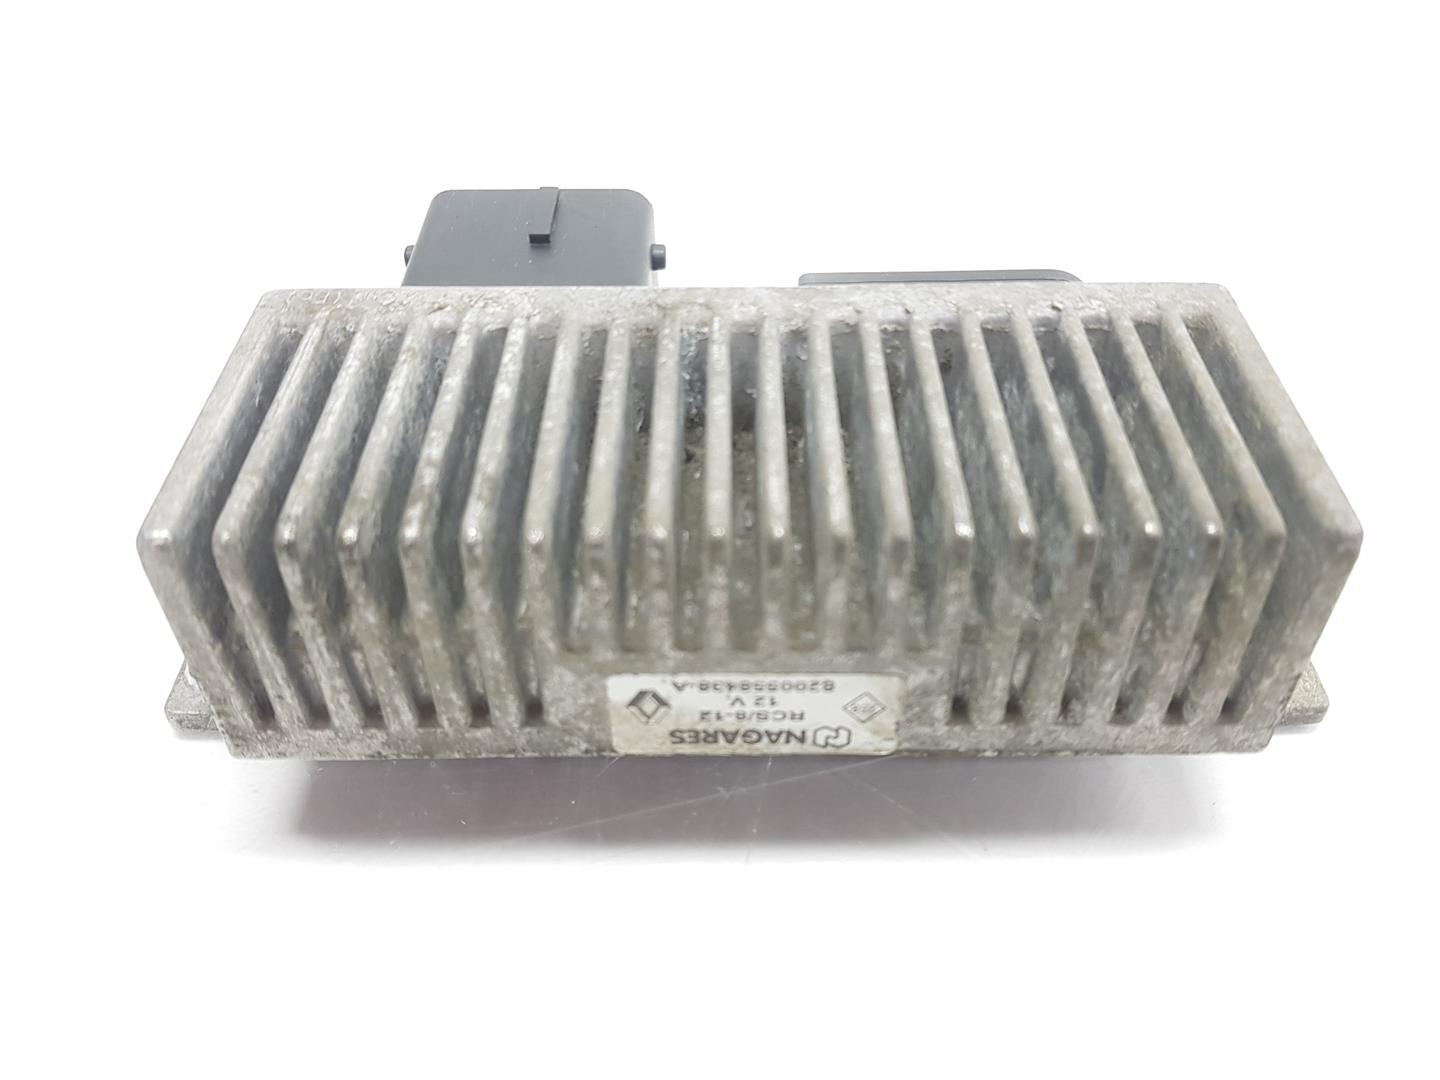 RENAULT Trafic 2 generation (2001-2015) Relays 8200558438A, 8200558438A 24223771